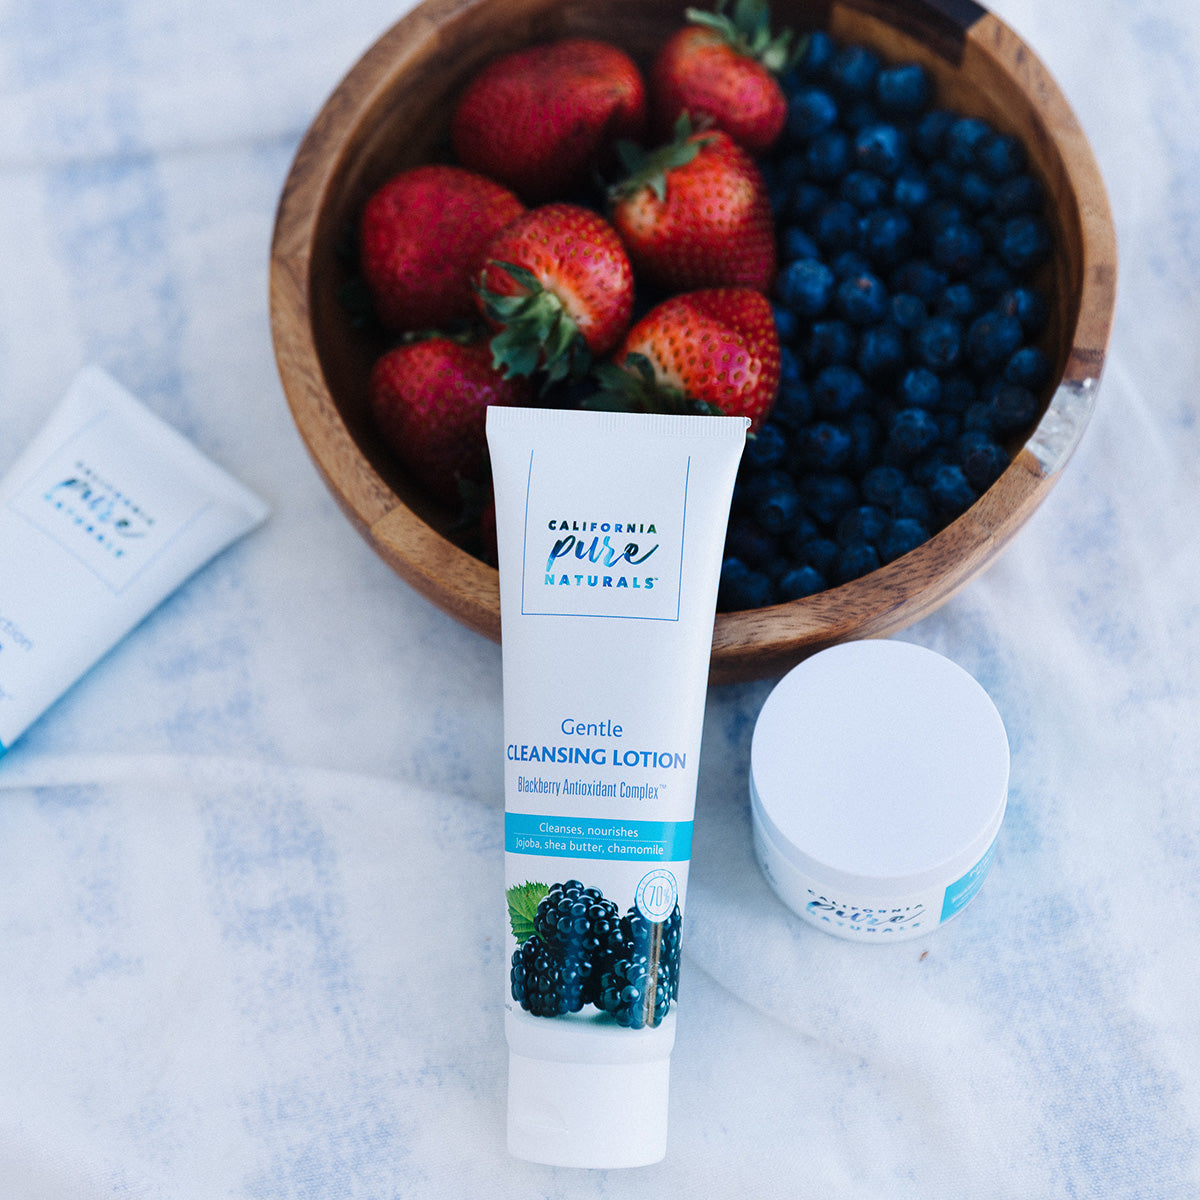 Cleansing Lotion and Nourishing Cream products by California Pure Naturals with strawberries and blueberries in a bowl behind products, highlighting the ingredients from which products are made.   